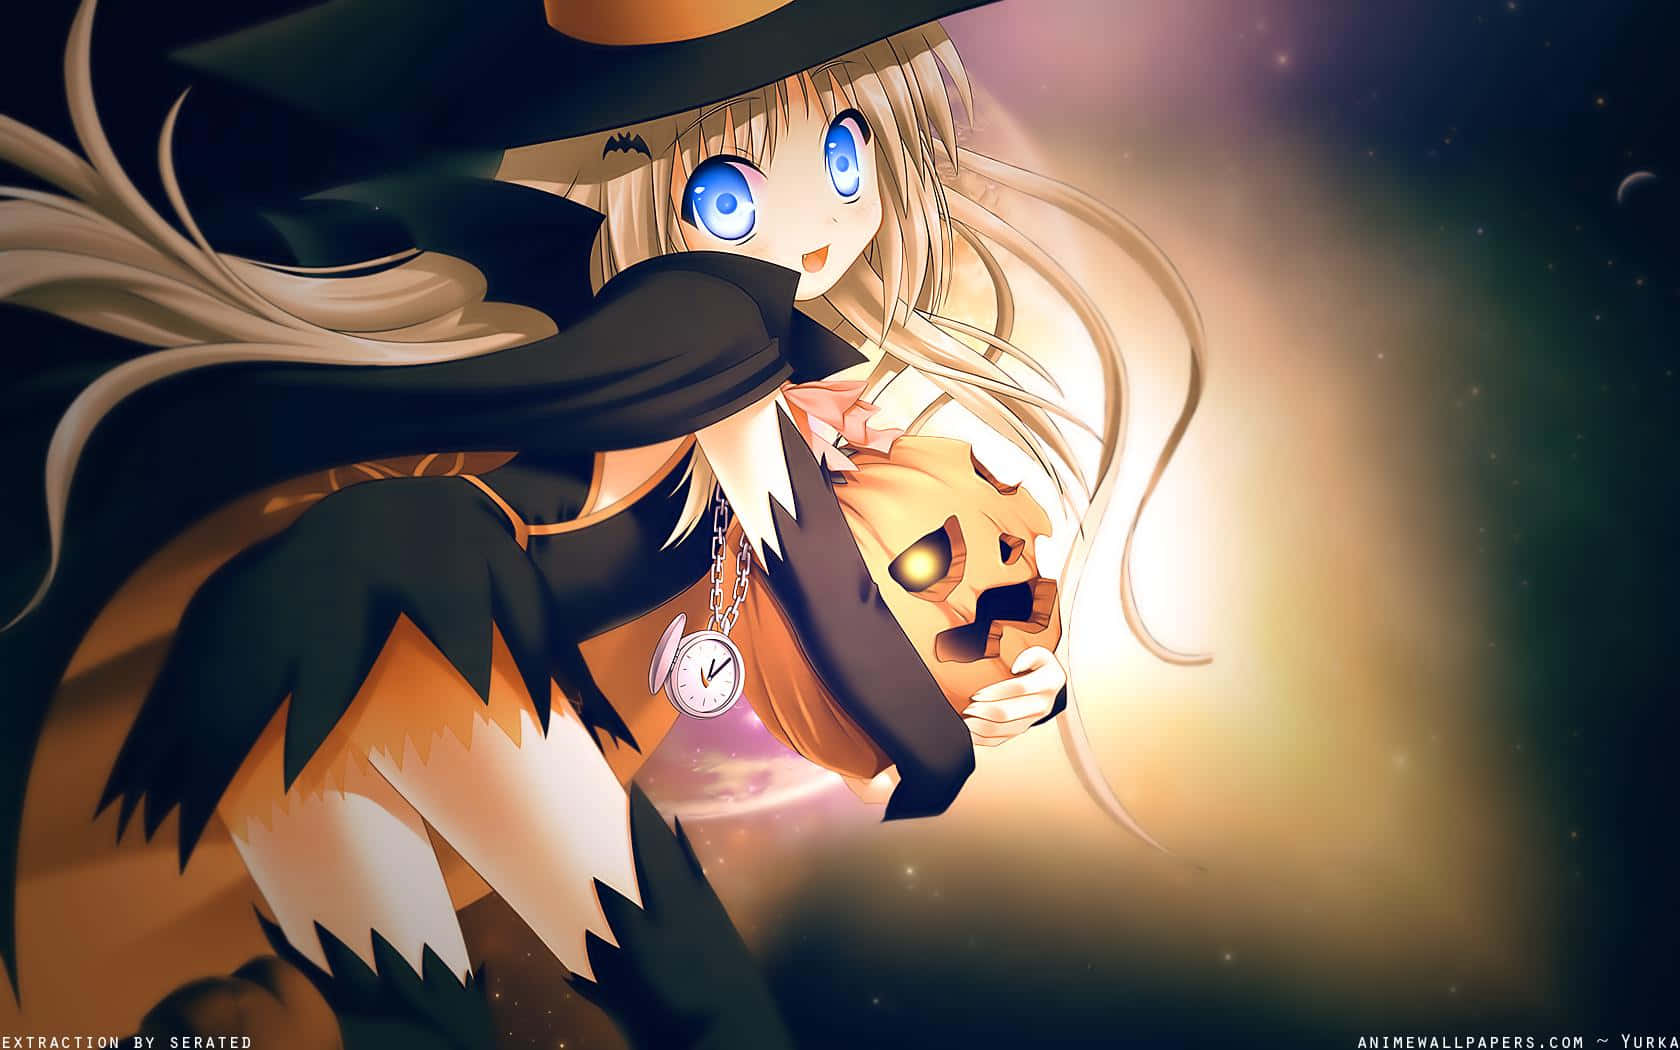 Celebrate Halloween With This Quirky Anime Girl Wallpaper